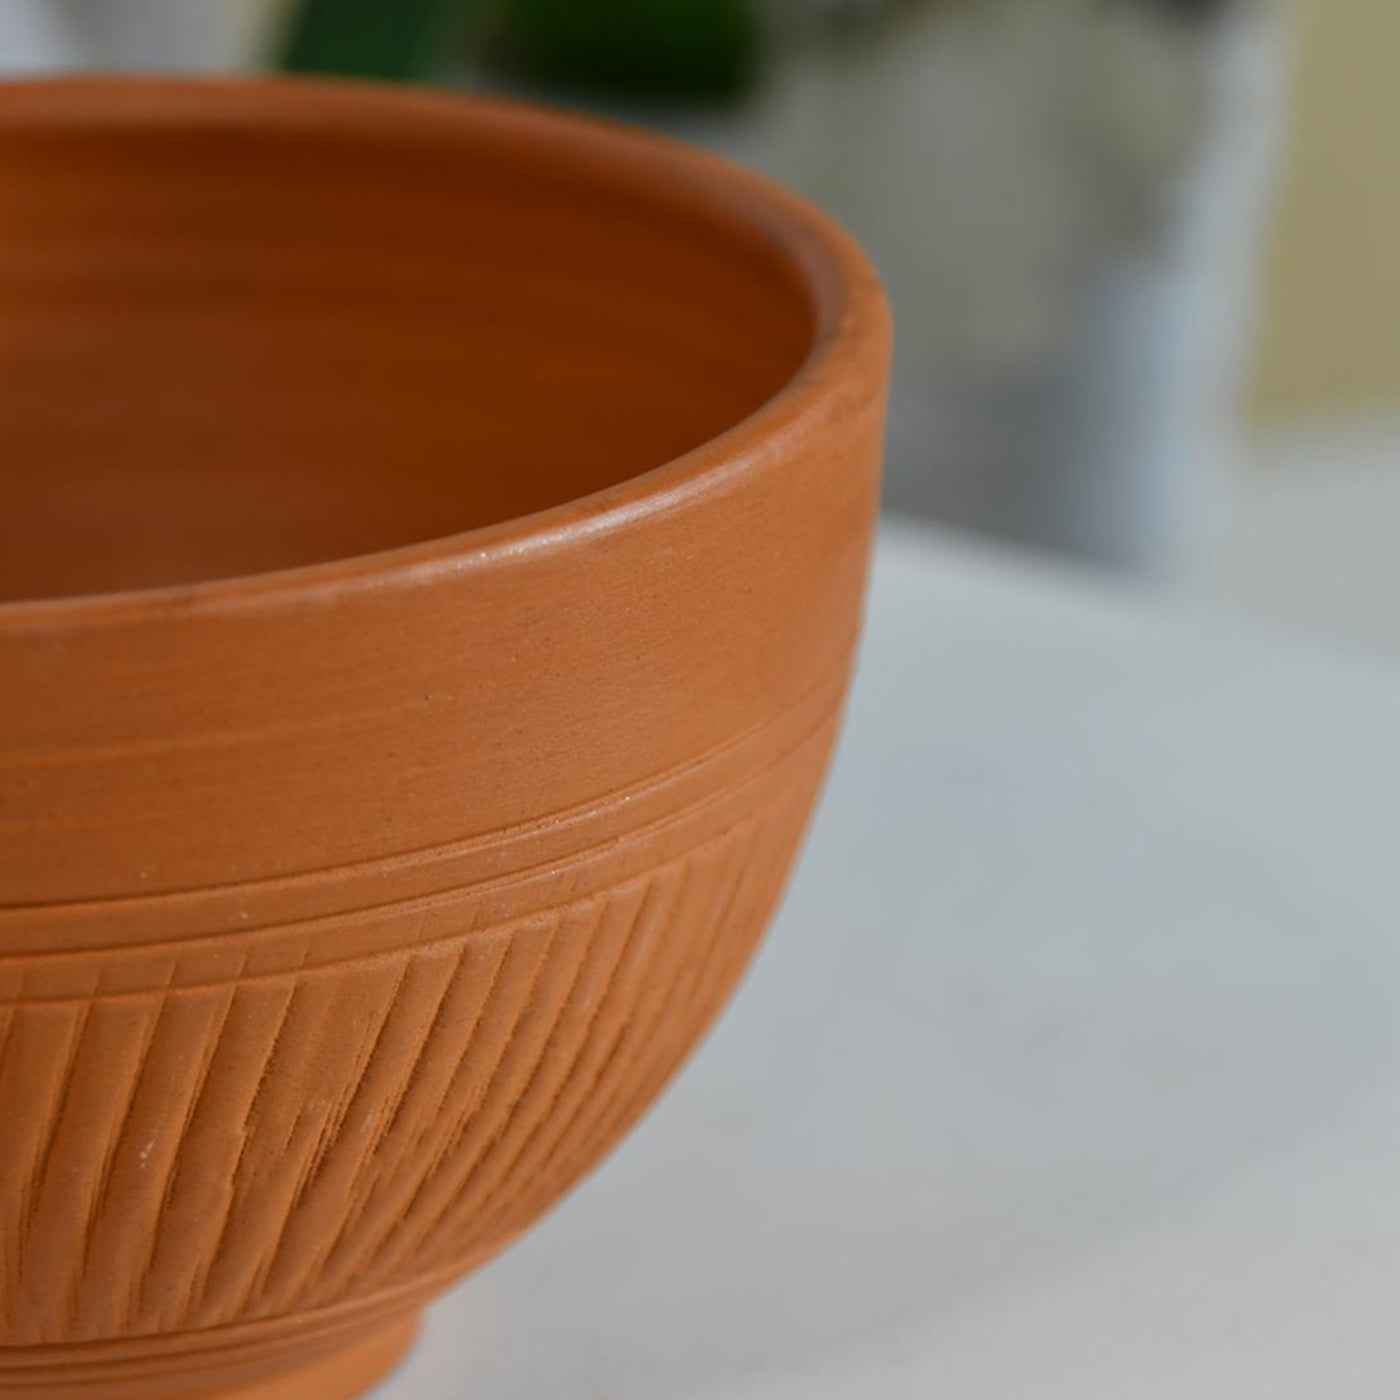 Handcrafted Terracotta Soup Bowl Artful Kitchenware & Decor